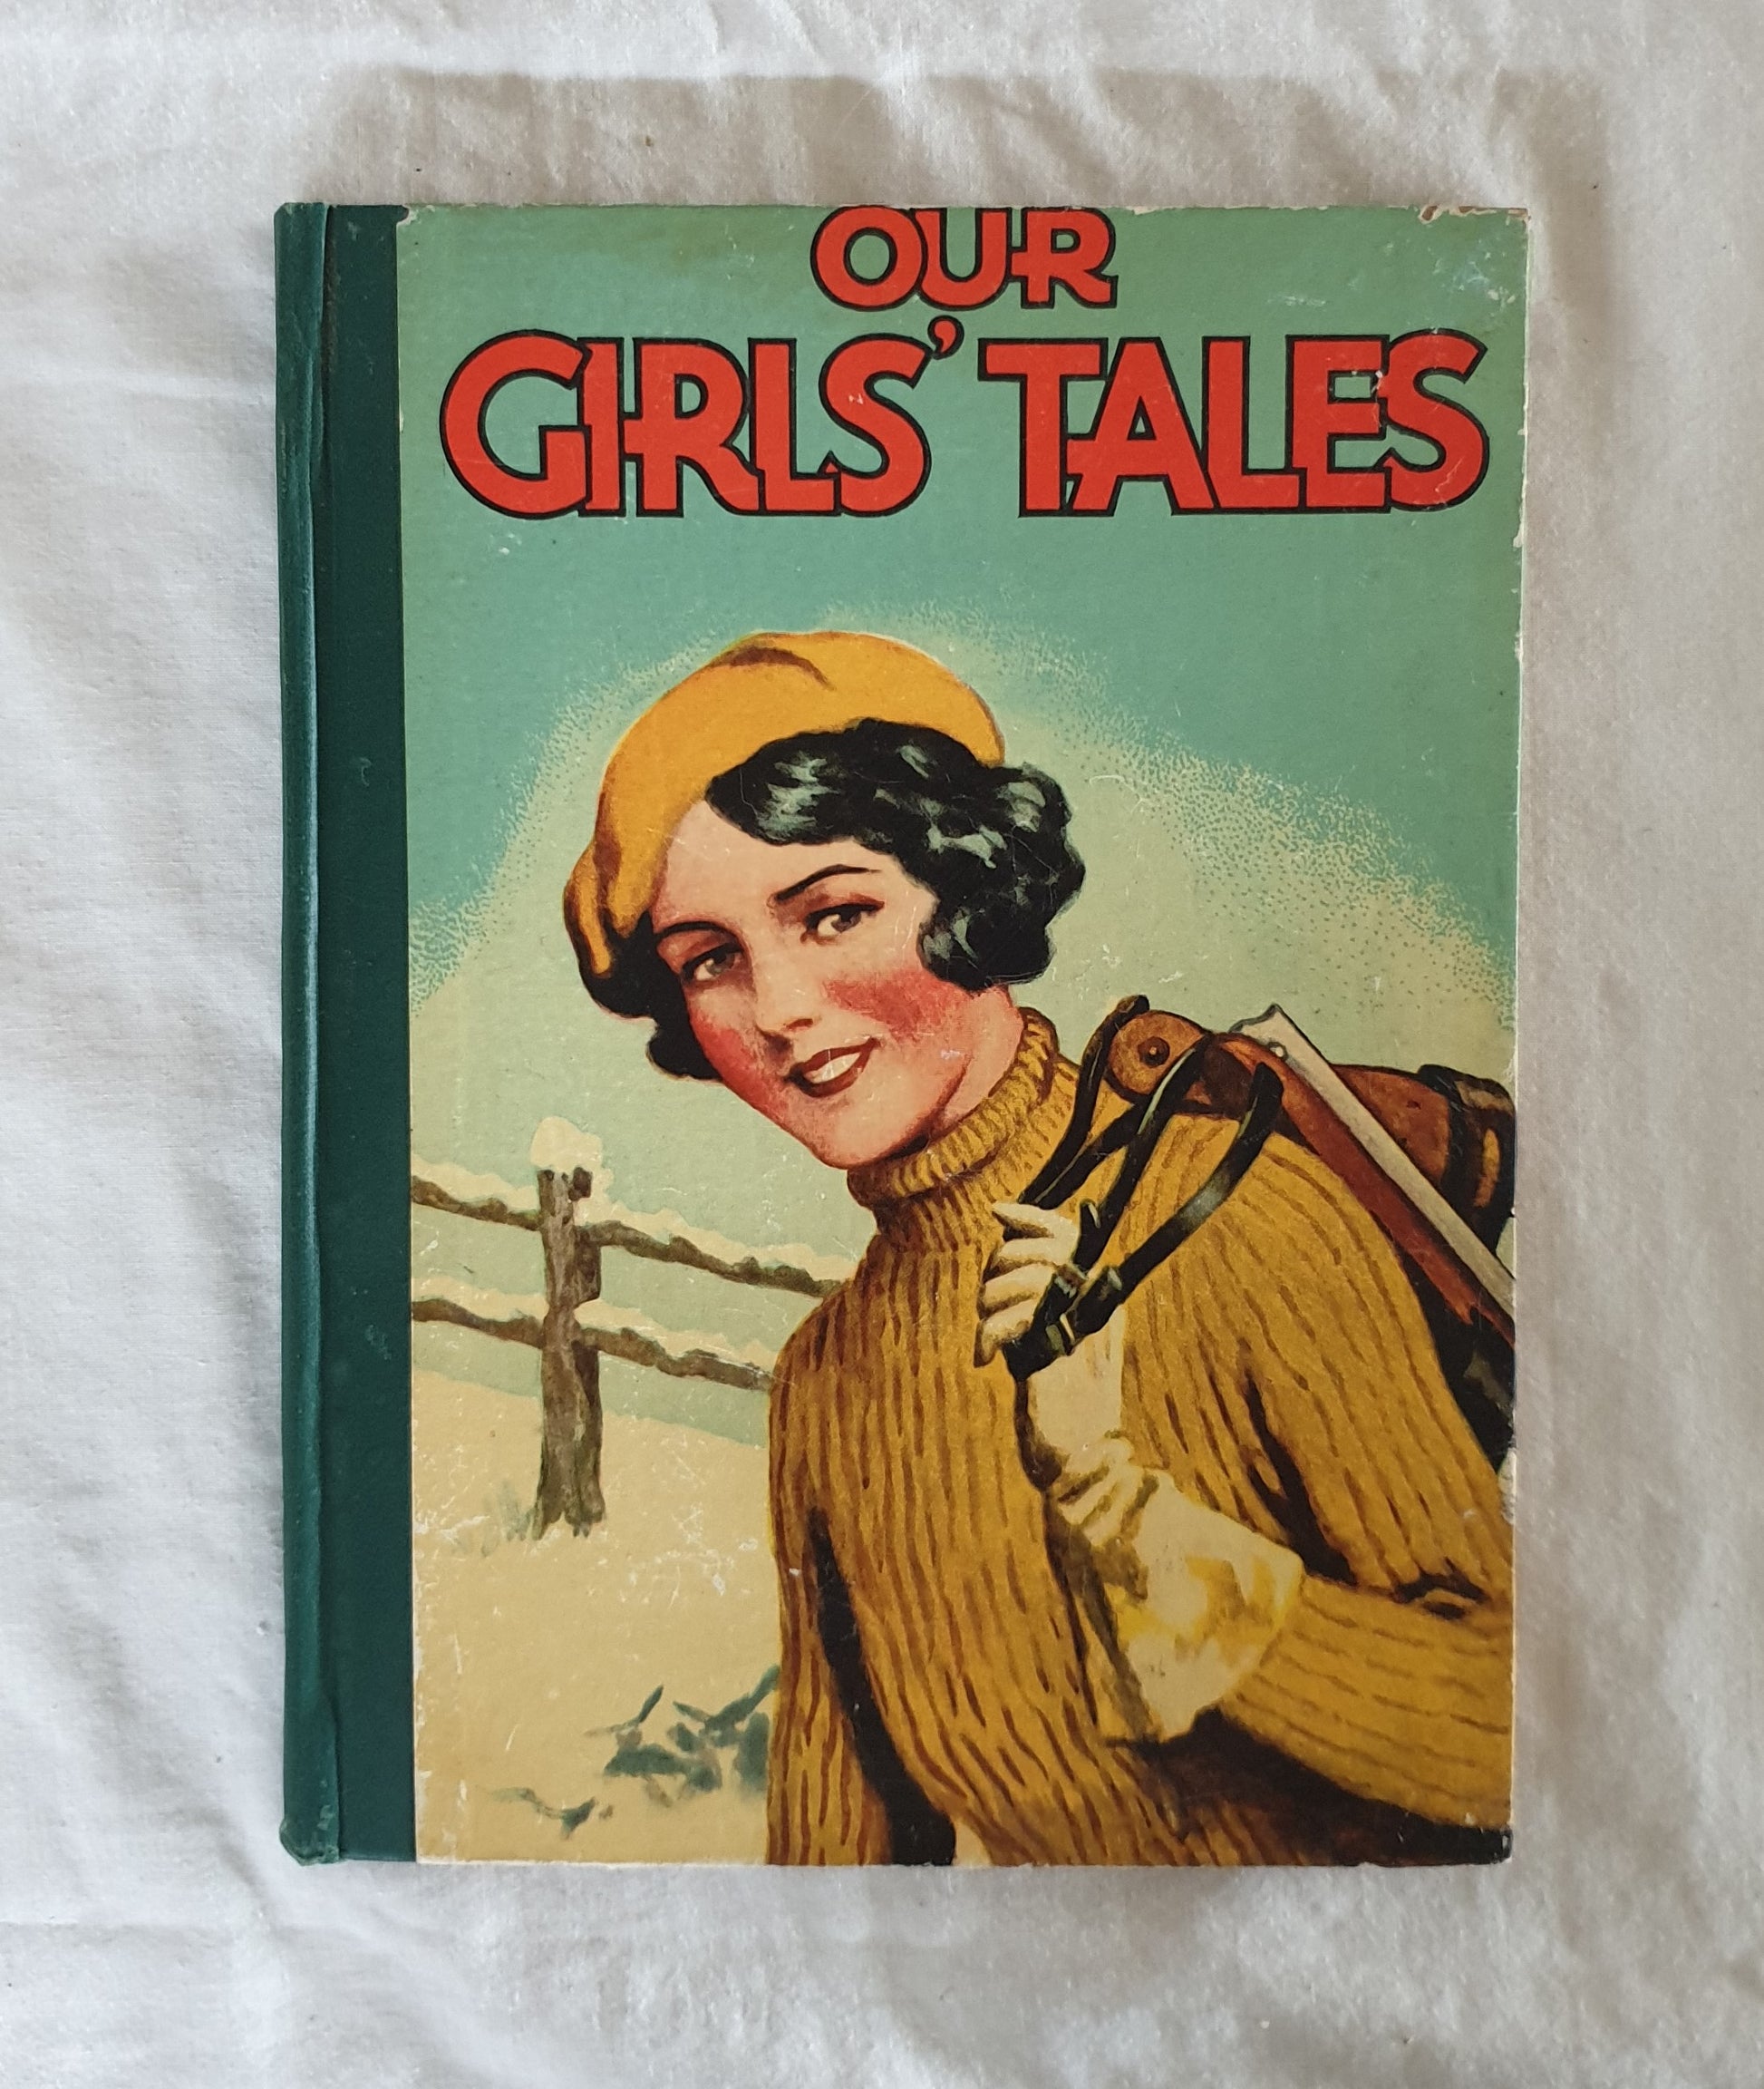 Our Girls' Tales by Renwick of Oiley